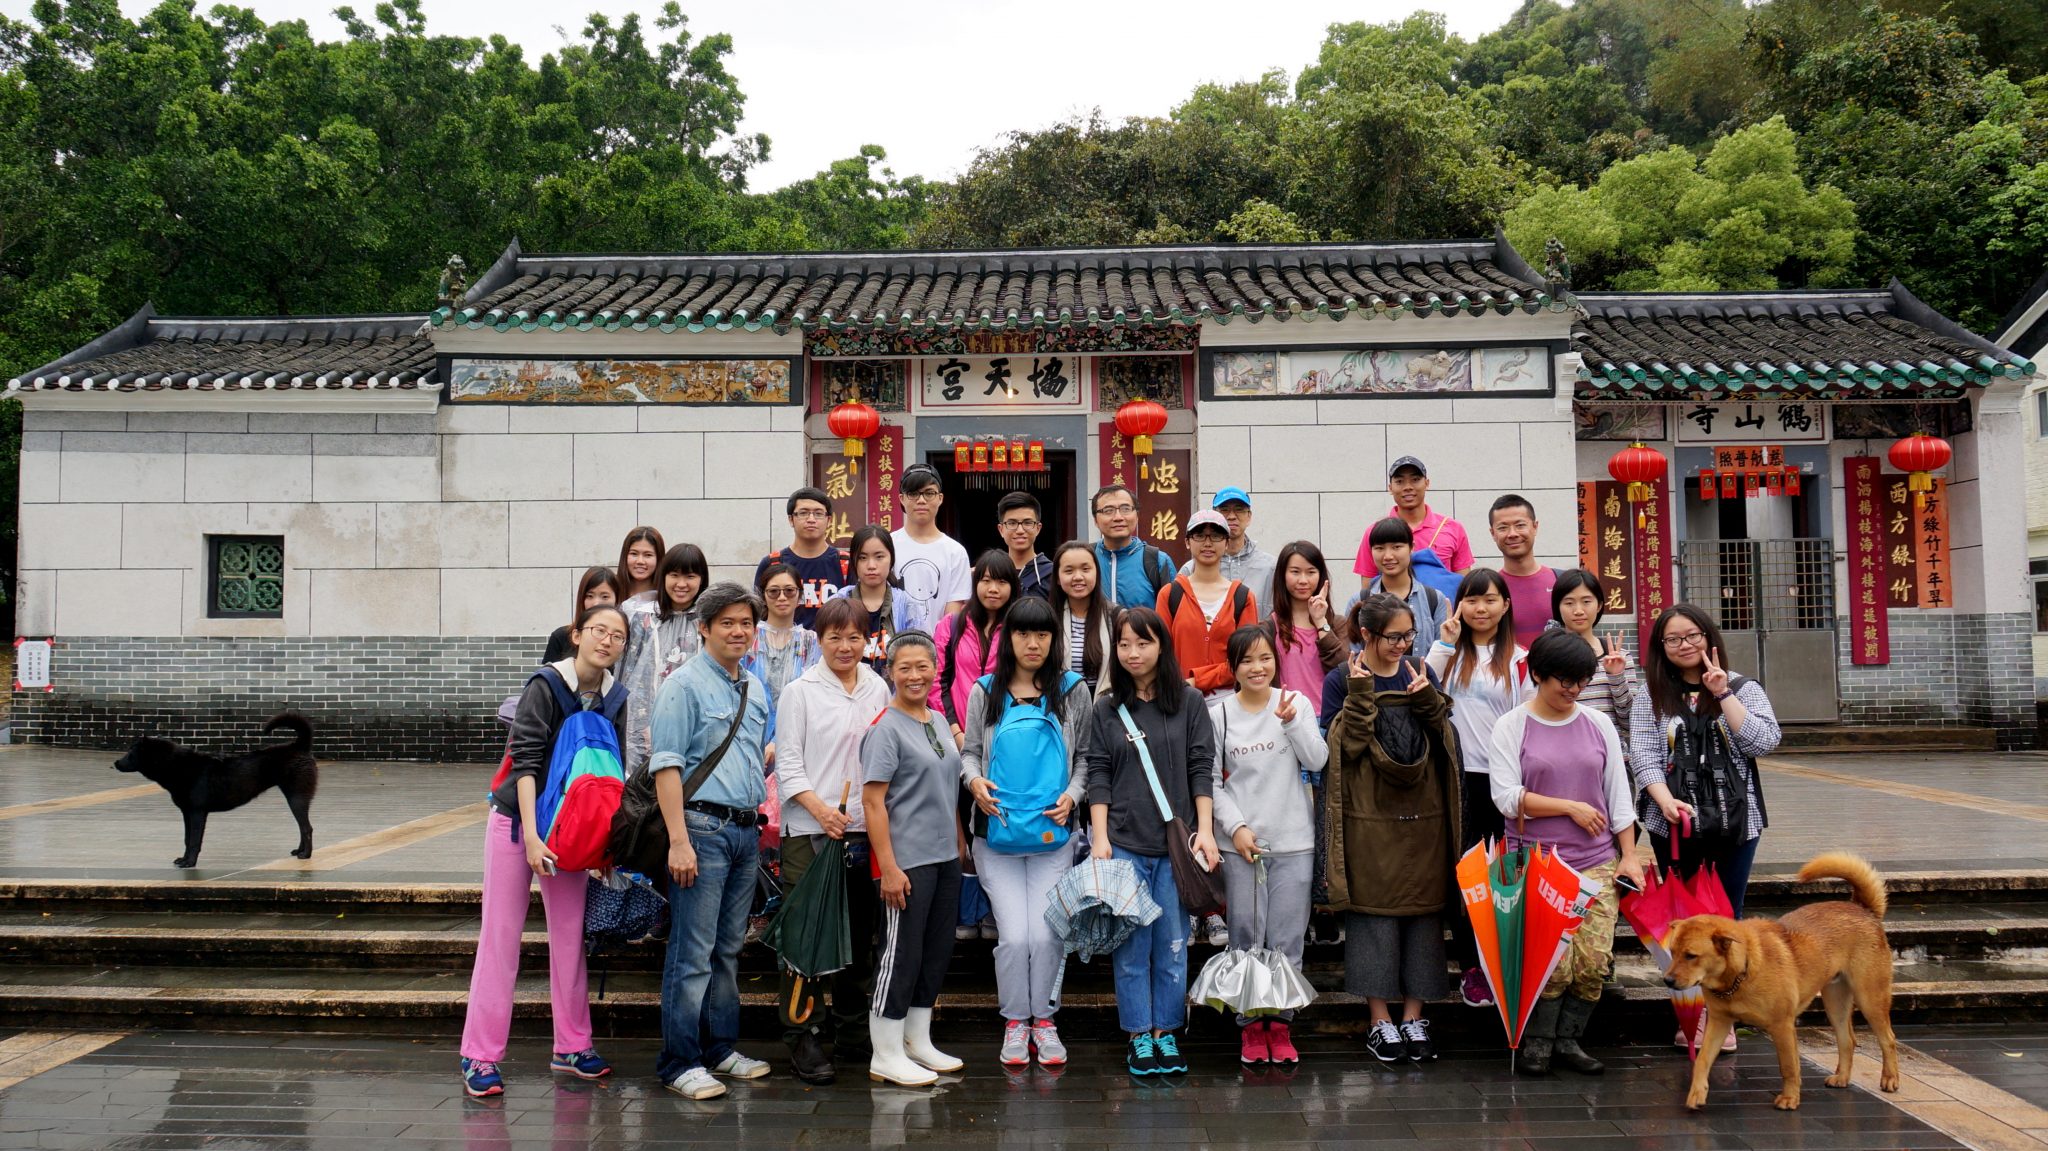 Group photo at the plaza of the village. 在村莊的廣場上合影。